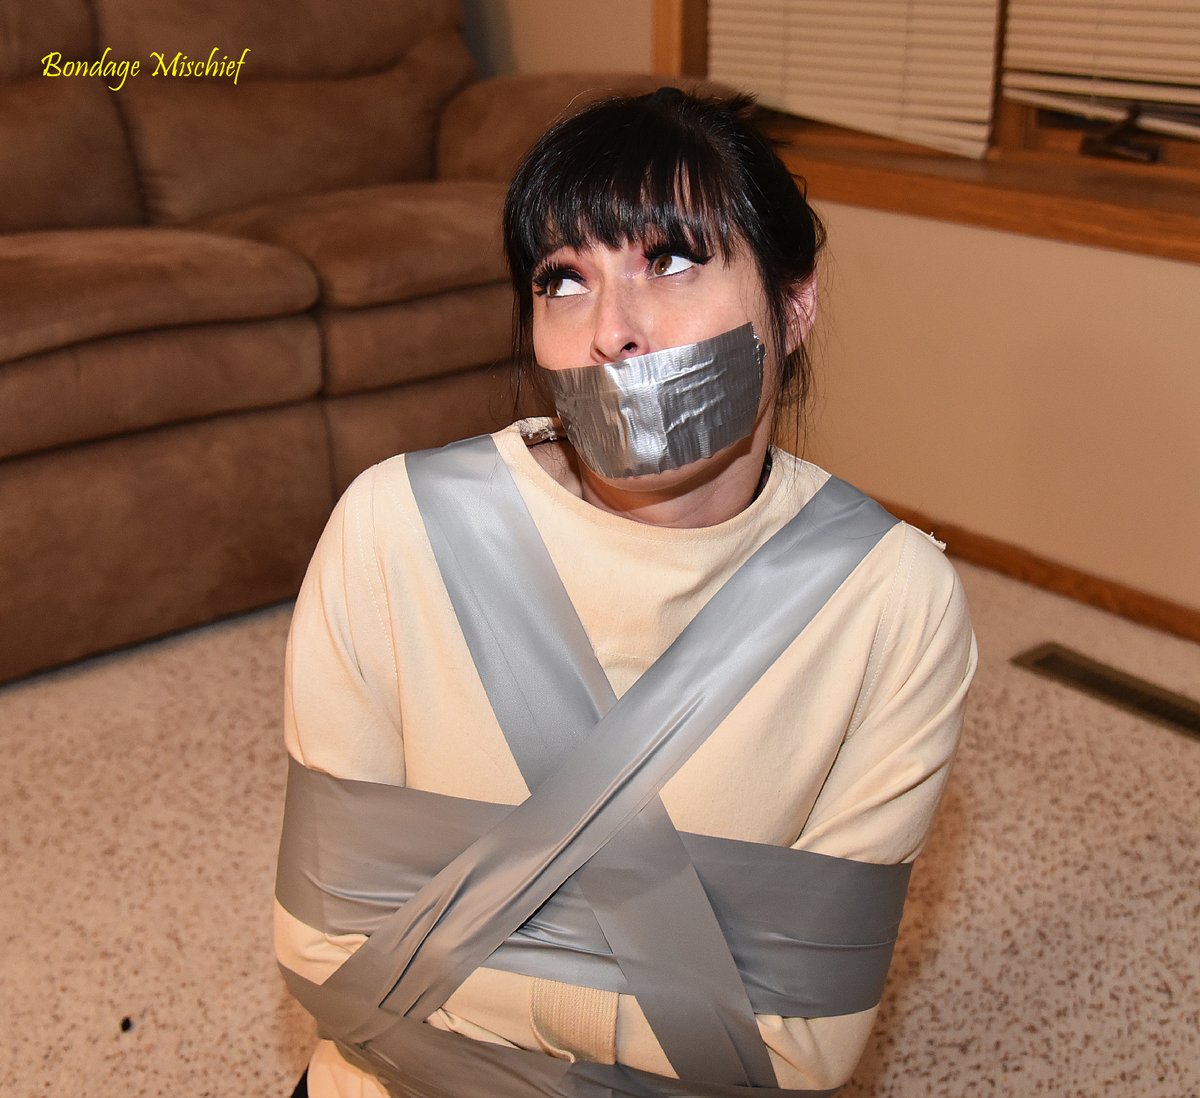 What is one way to make sure @lilmizzunique doesn't leave the house? How about a straight jacket and duct tape. See how effective it is in this archive set available now at bondagemischief.com/updates/unique…, @paysitemanager